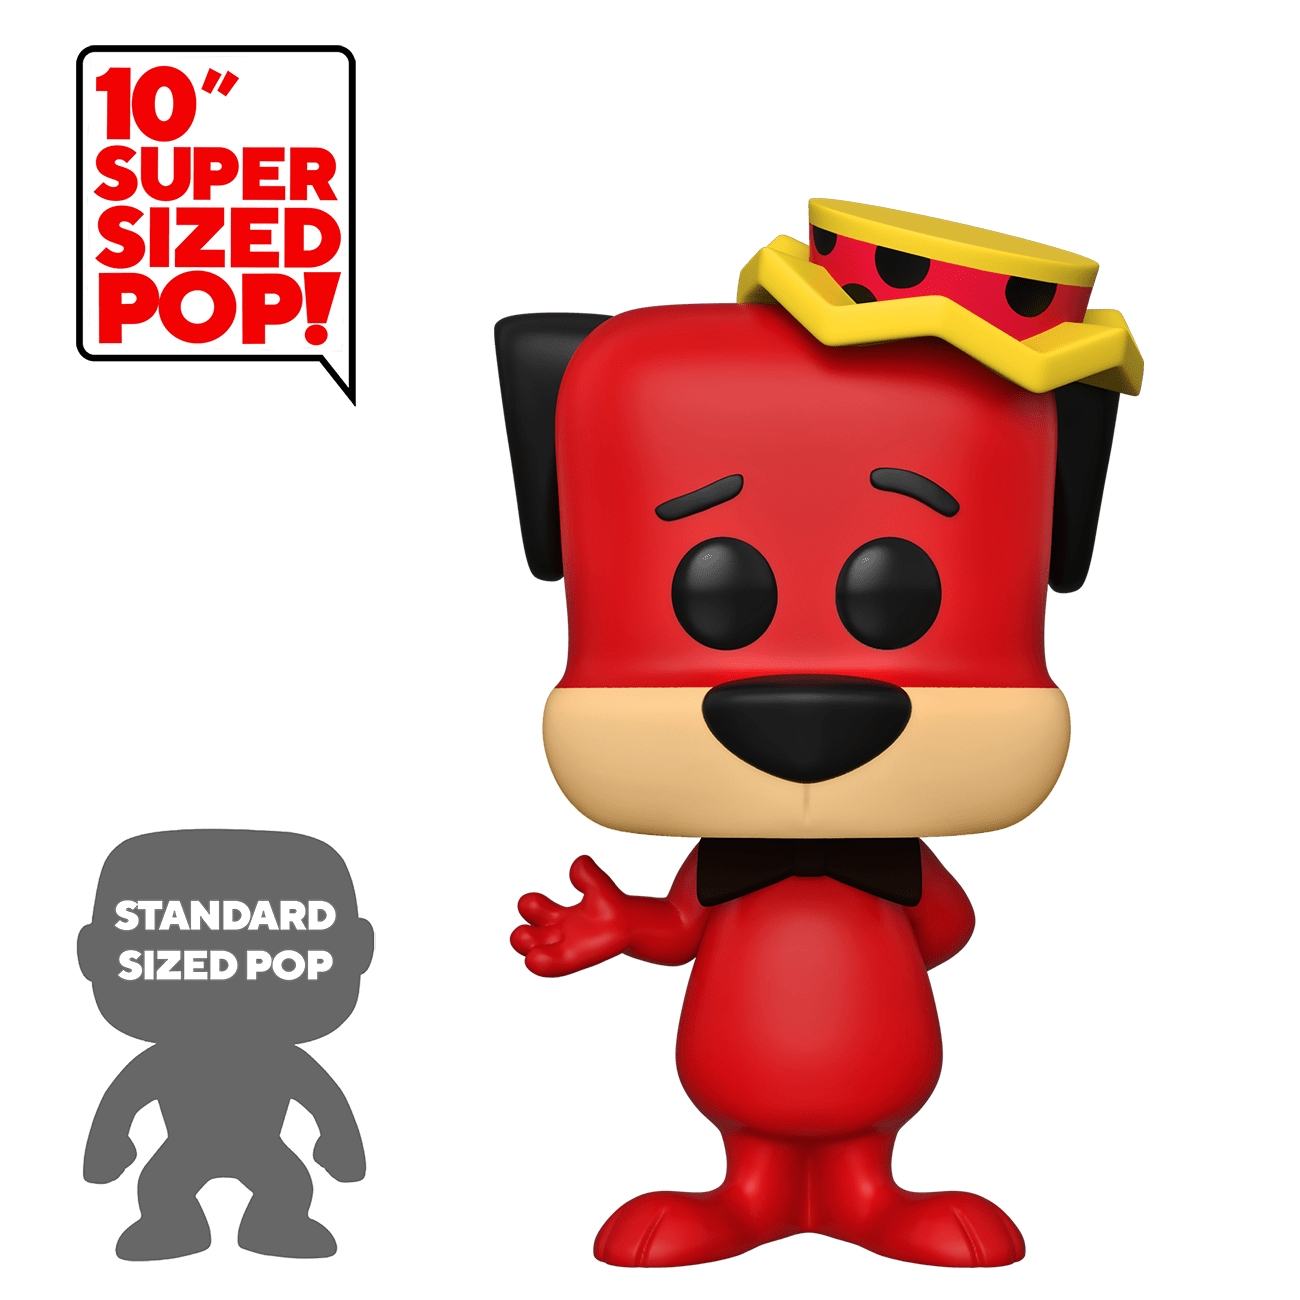 Huckleberry Pop Animation Hound - Limited Edition 10" Red Chase